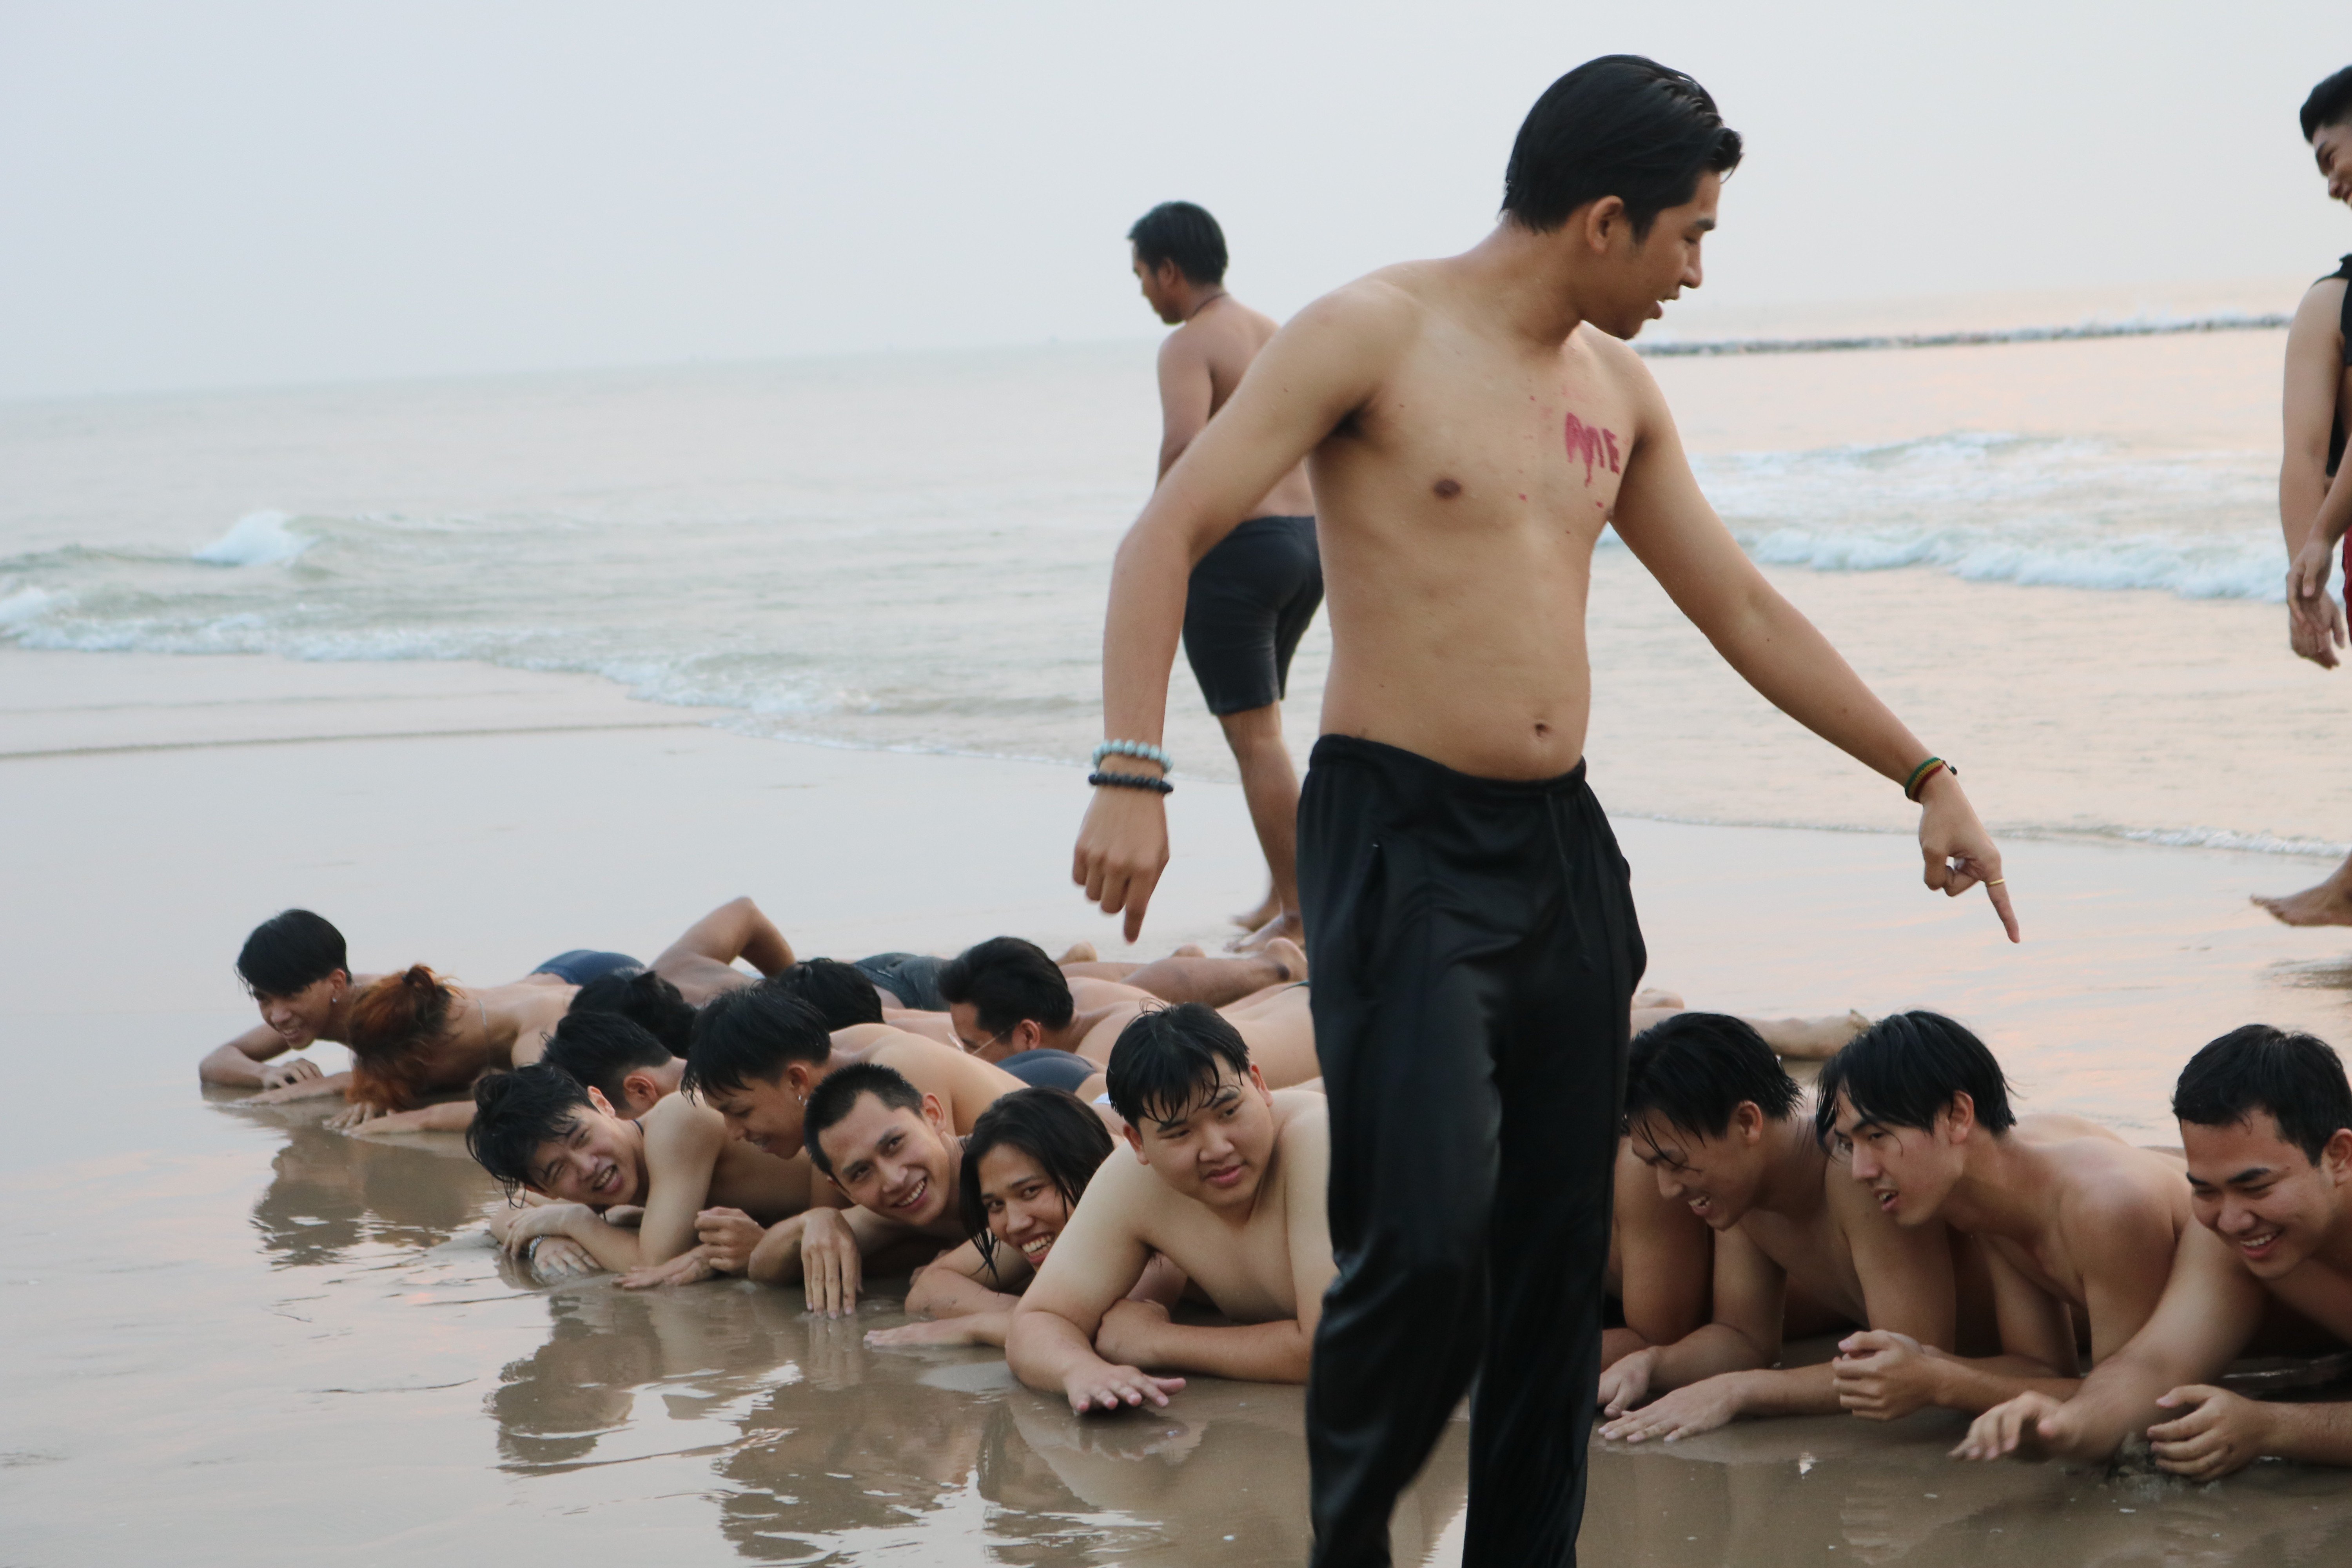 Hazing is widespread in Thailand. It is supposed to teach respect for elders, but is basically bullying. Photo: courtesy of Sotus